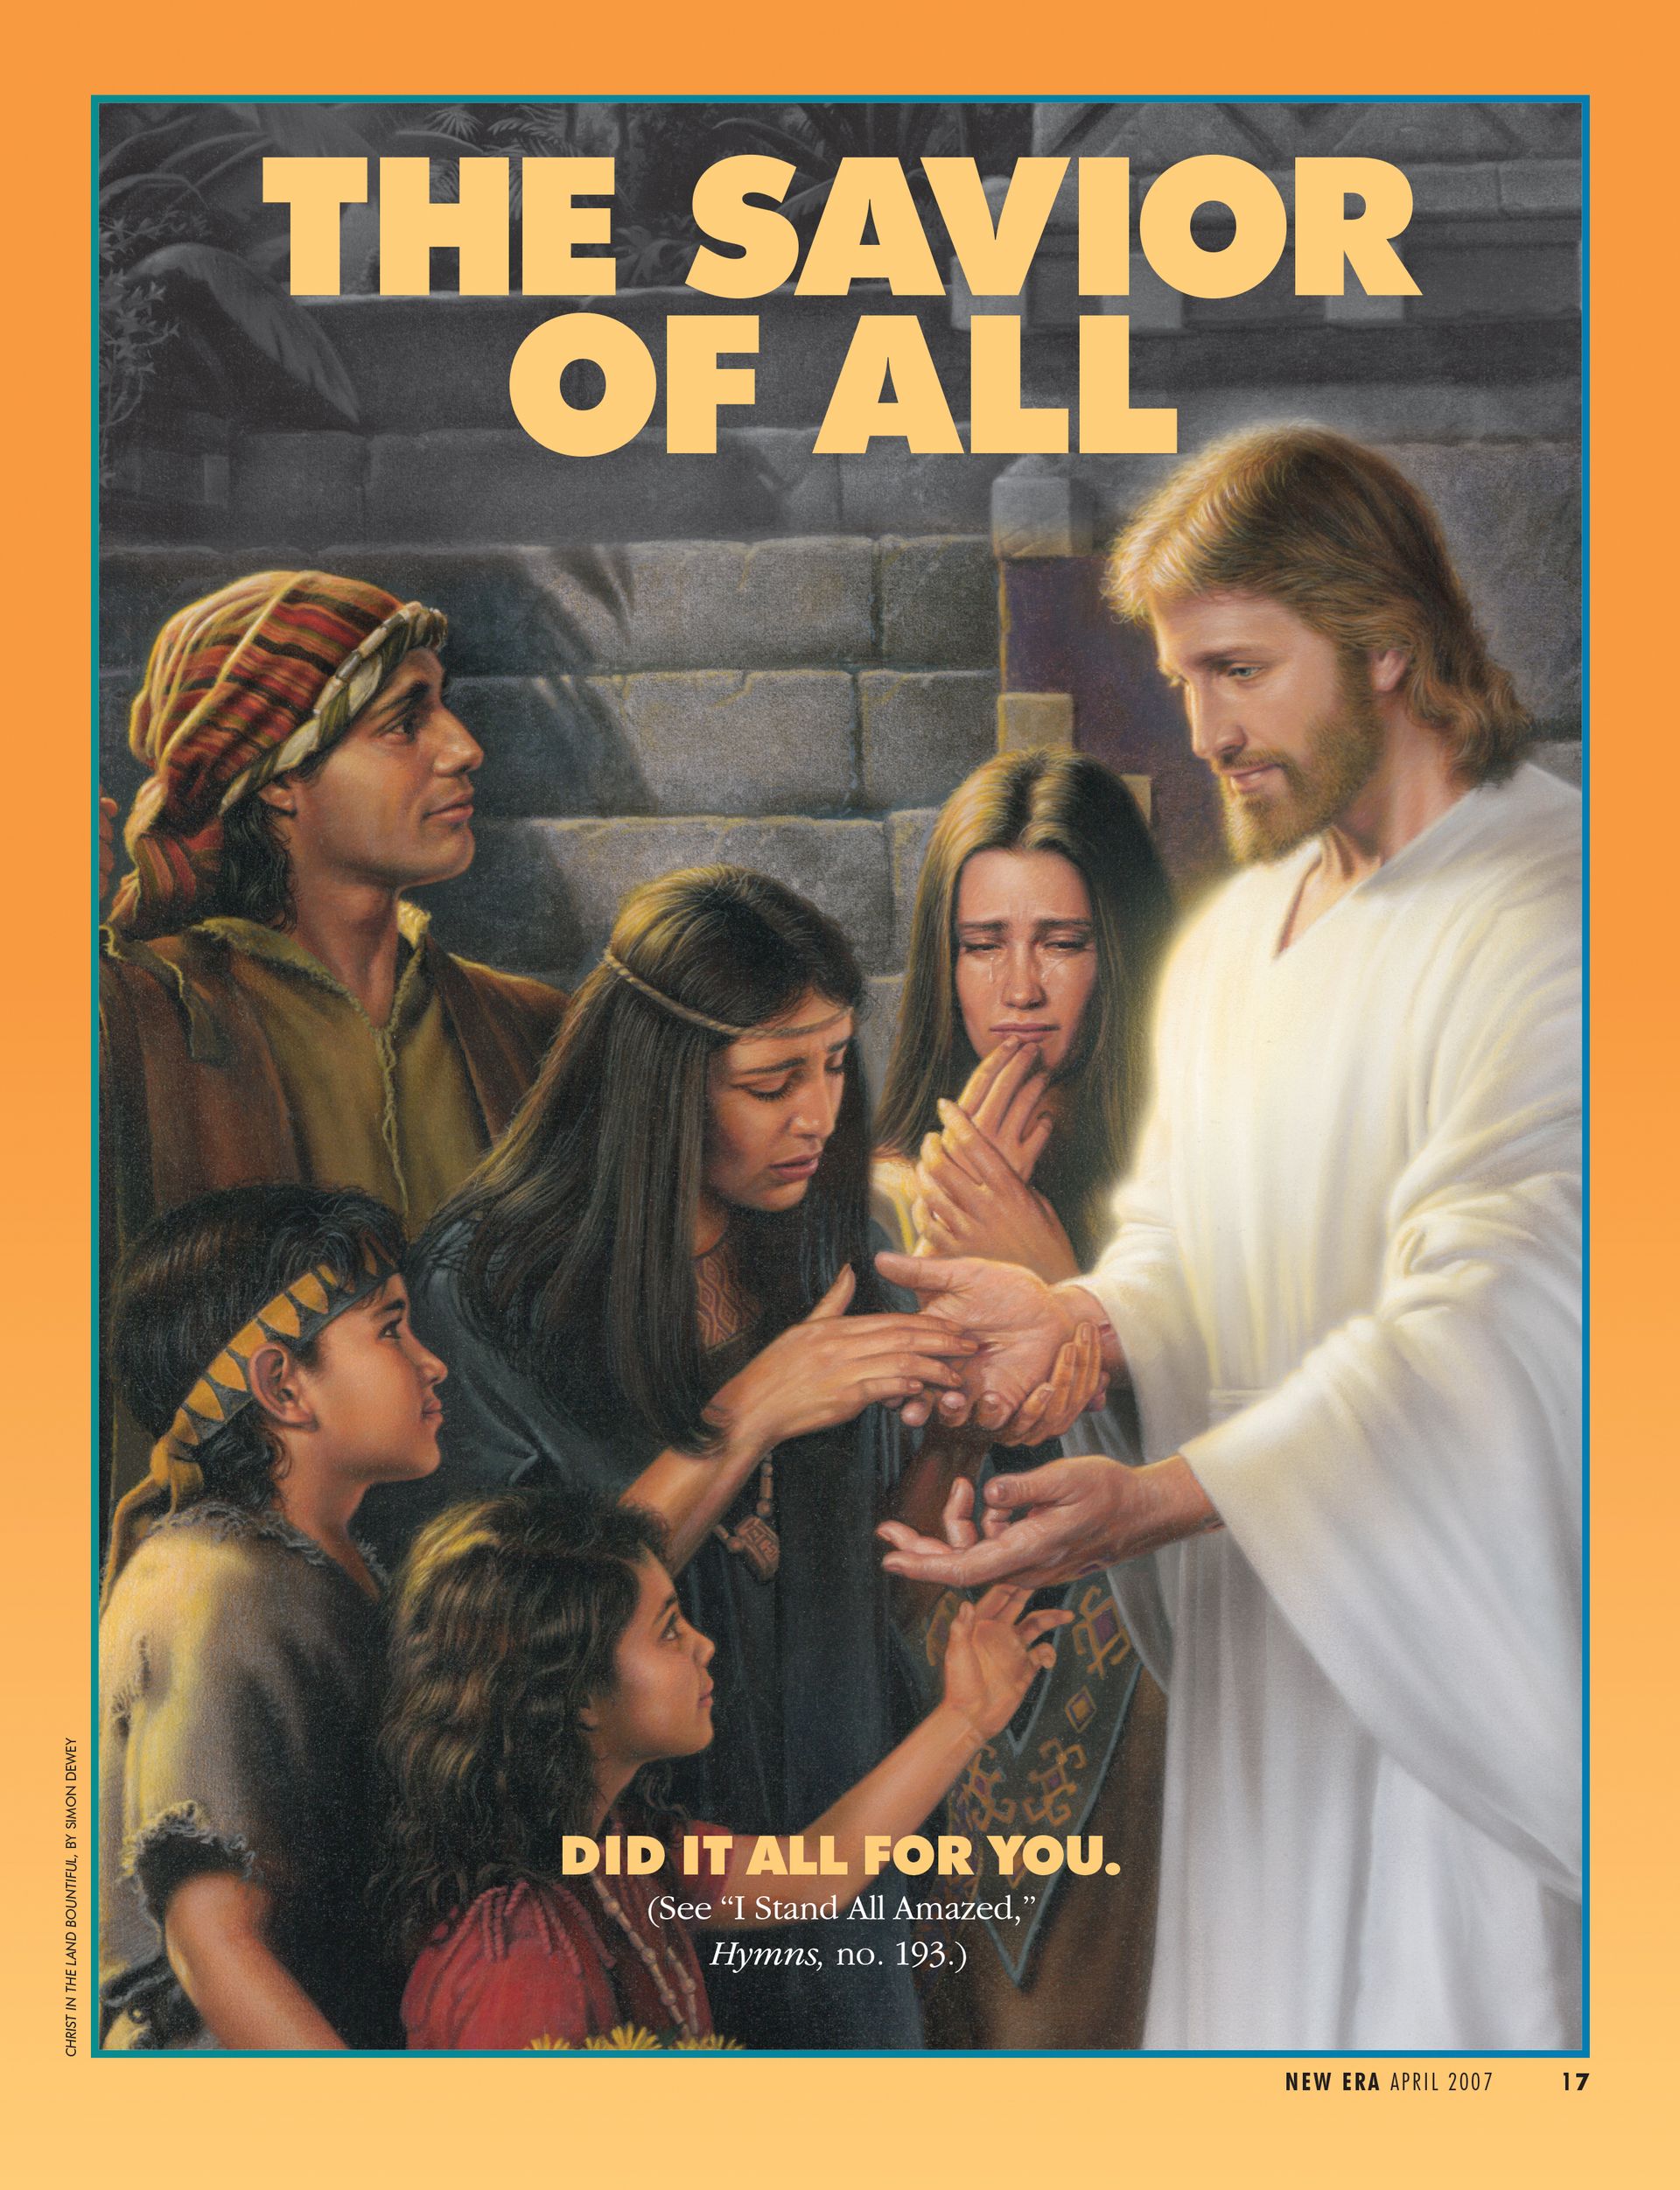 The Savior of All Did It All for You. (See “I Stand All Amazed,” Hymns, no. 193.) Apr. 2007 © undefined ipCode 1.